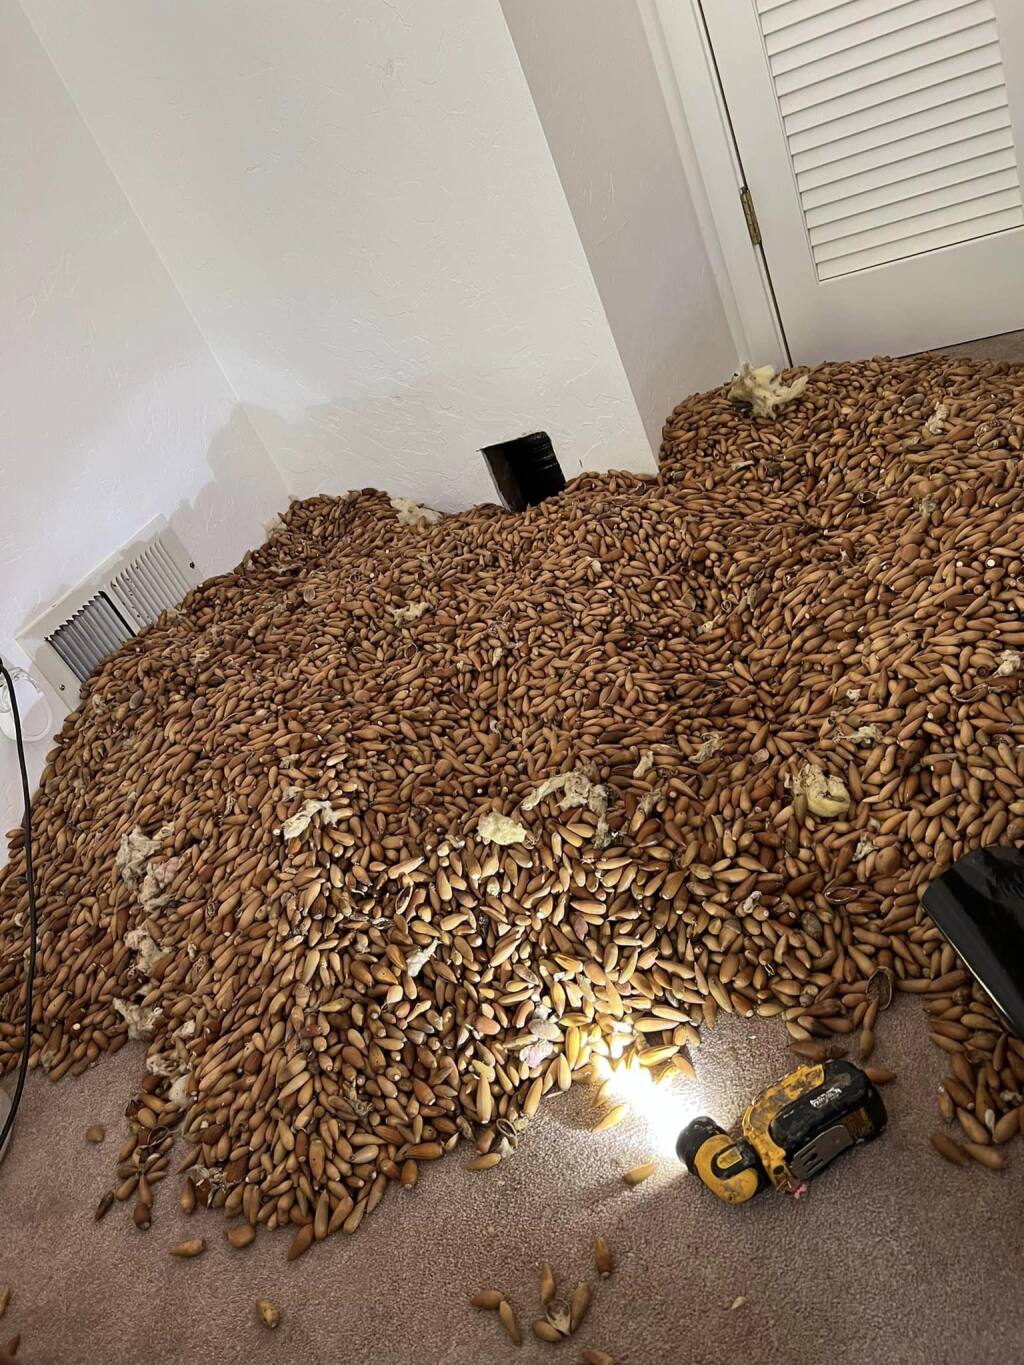 Over 700 pounds of acorns had been stacked 20 to 25 feet high in a Glen Ellen home’s chimney by a pair of woodpeckers. (Nick Castro)